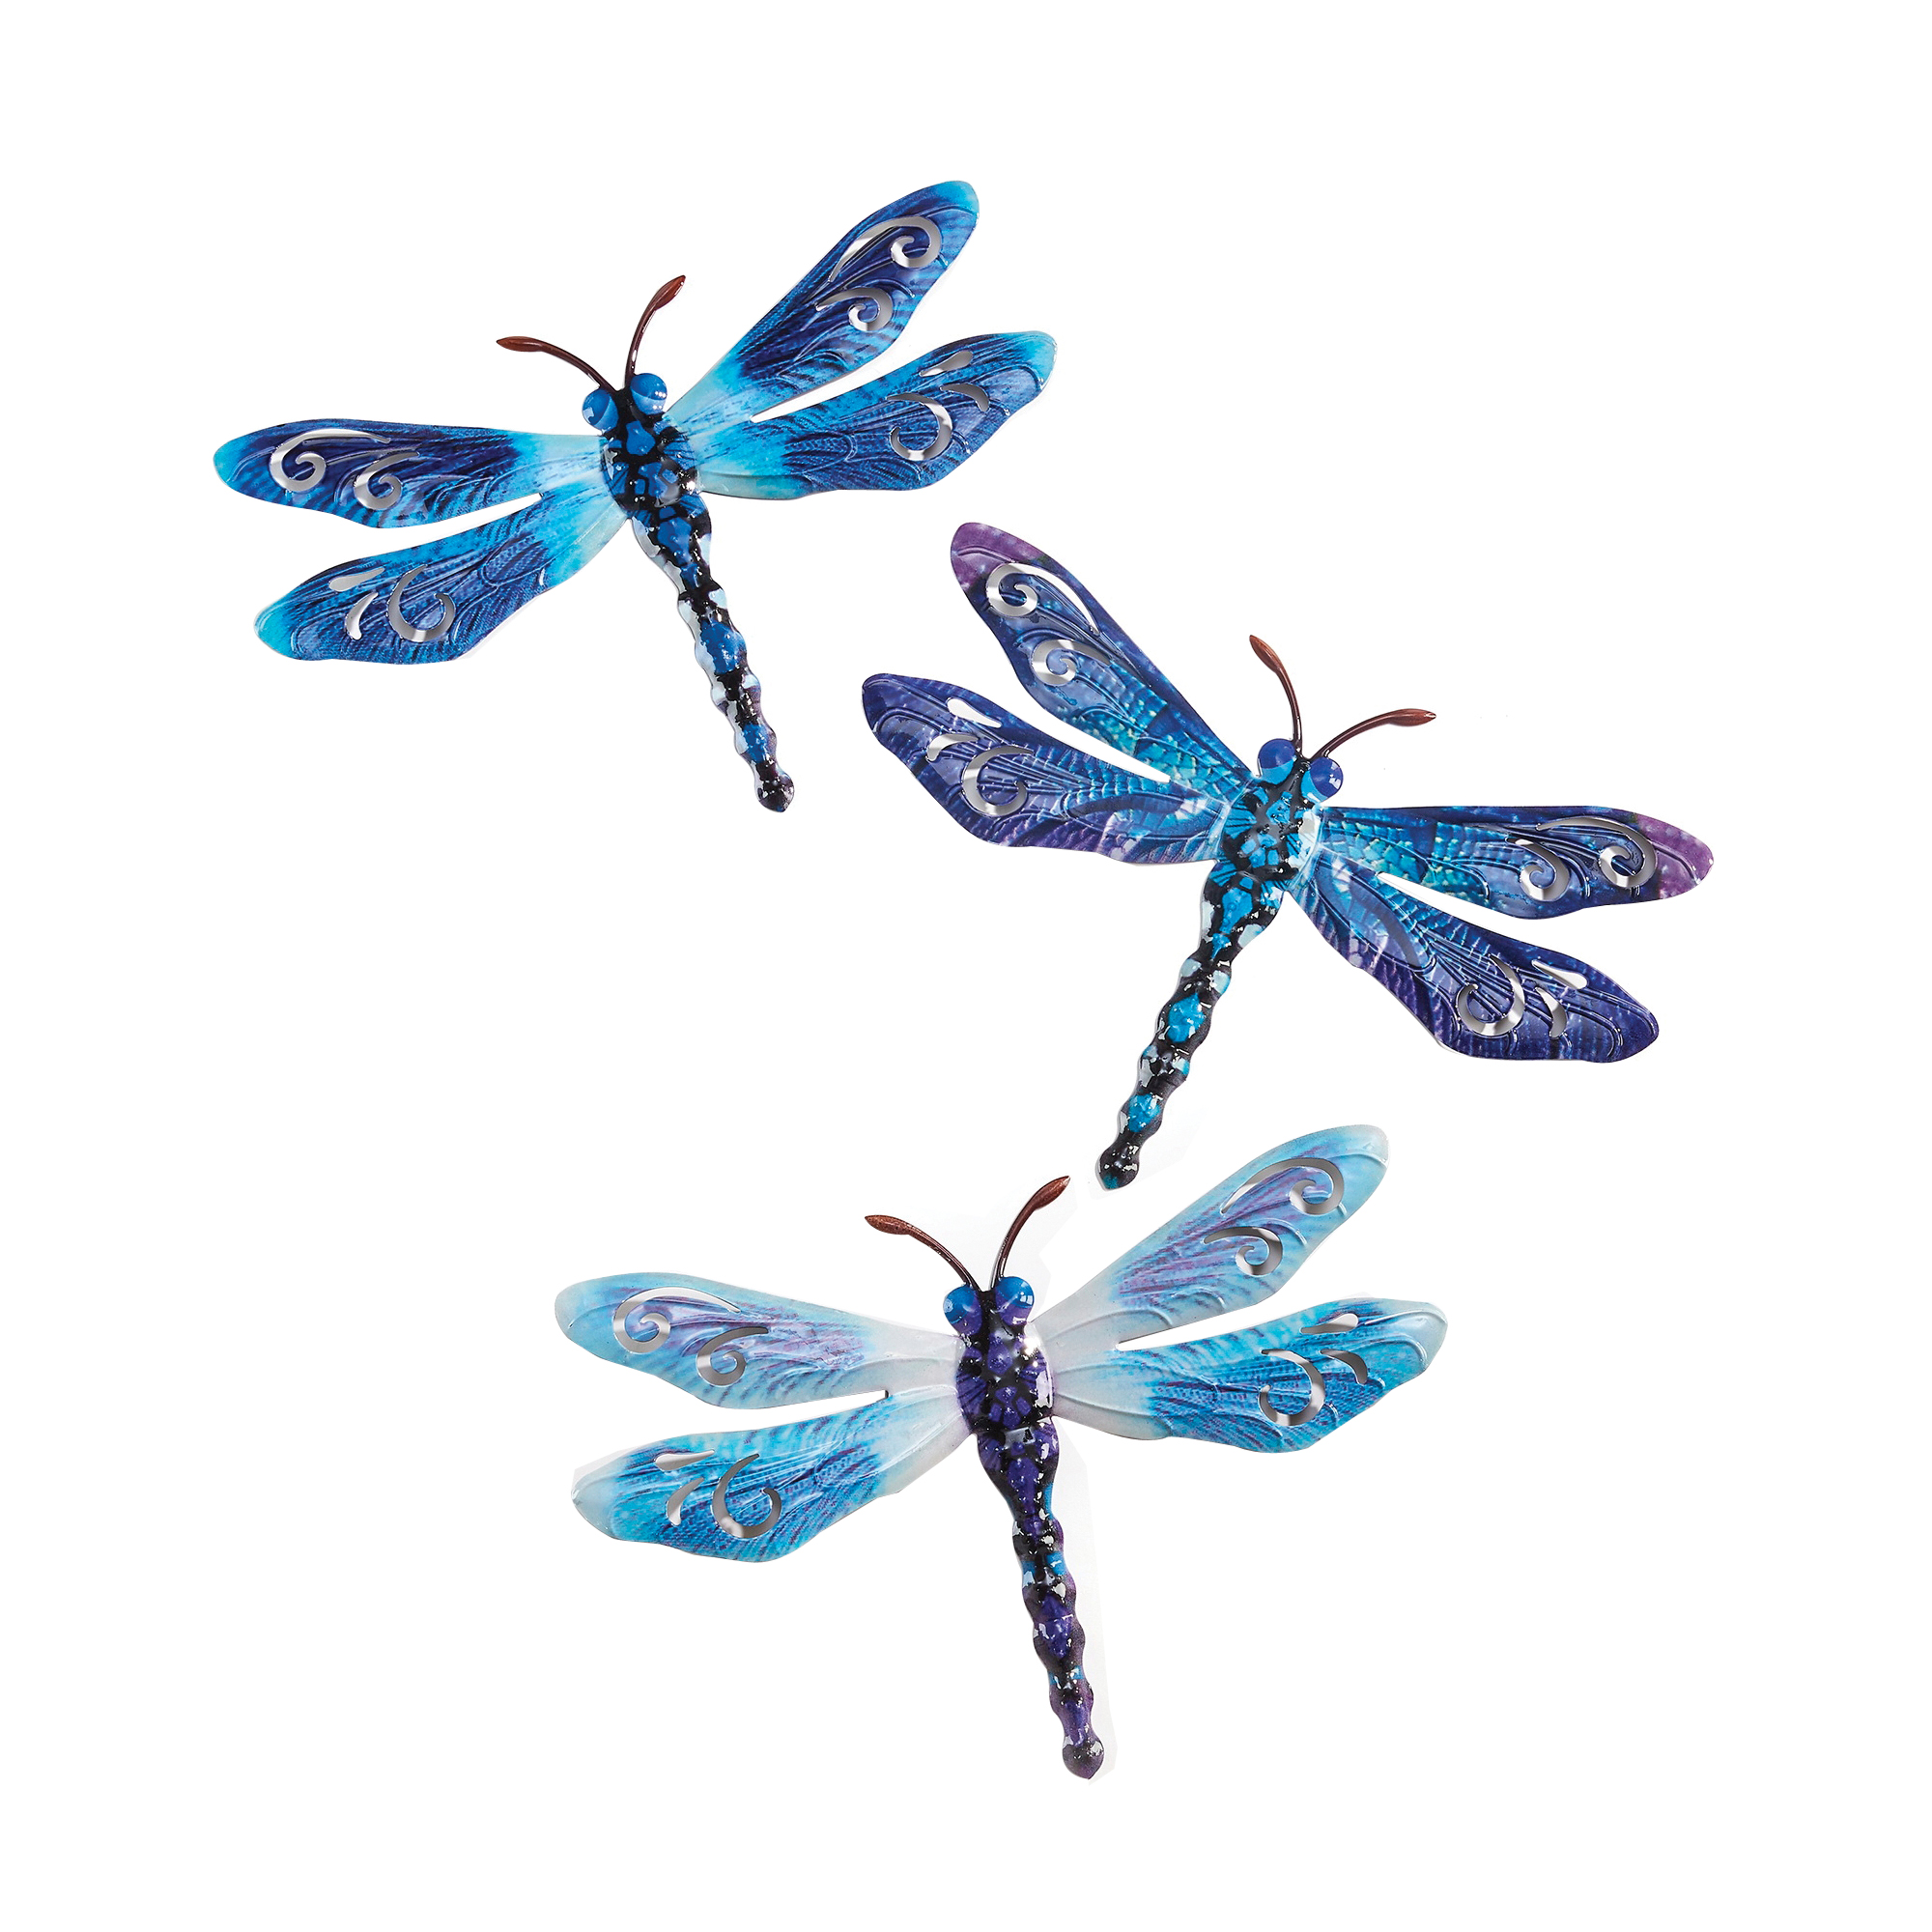 Giftcraft 716150 Large Wall Decor, Dragonfly, Metal - 1